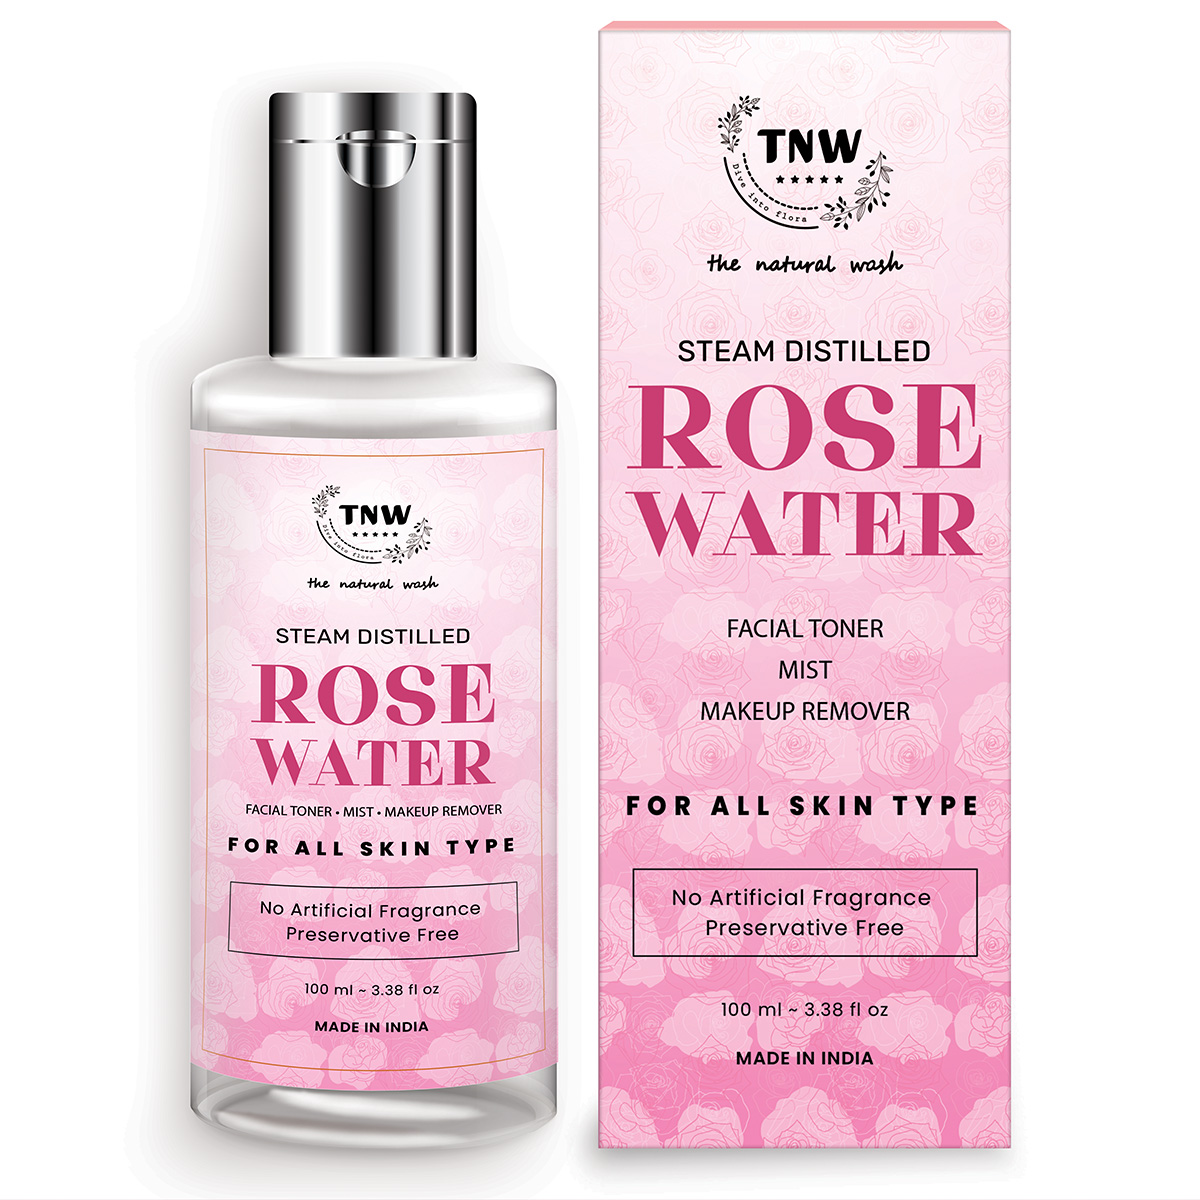 TNW - The Natural Wash Steam Distilled Rose Water For Makeup Remover-100ml